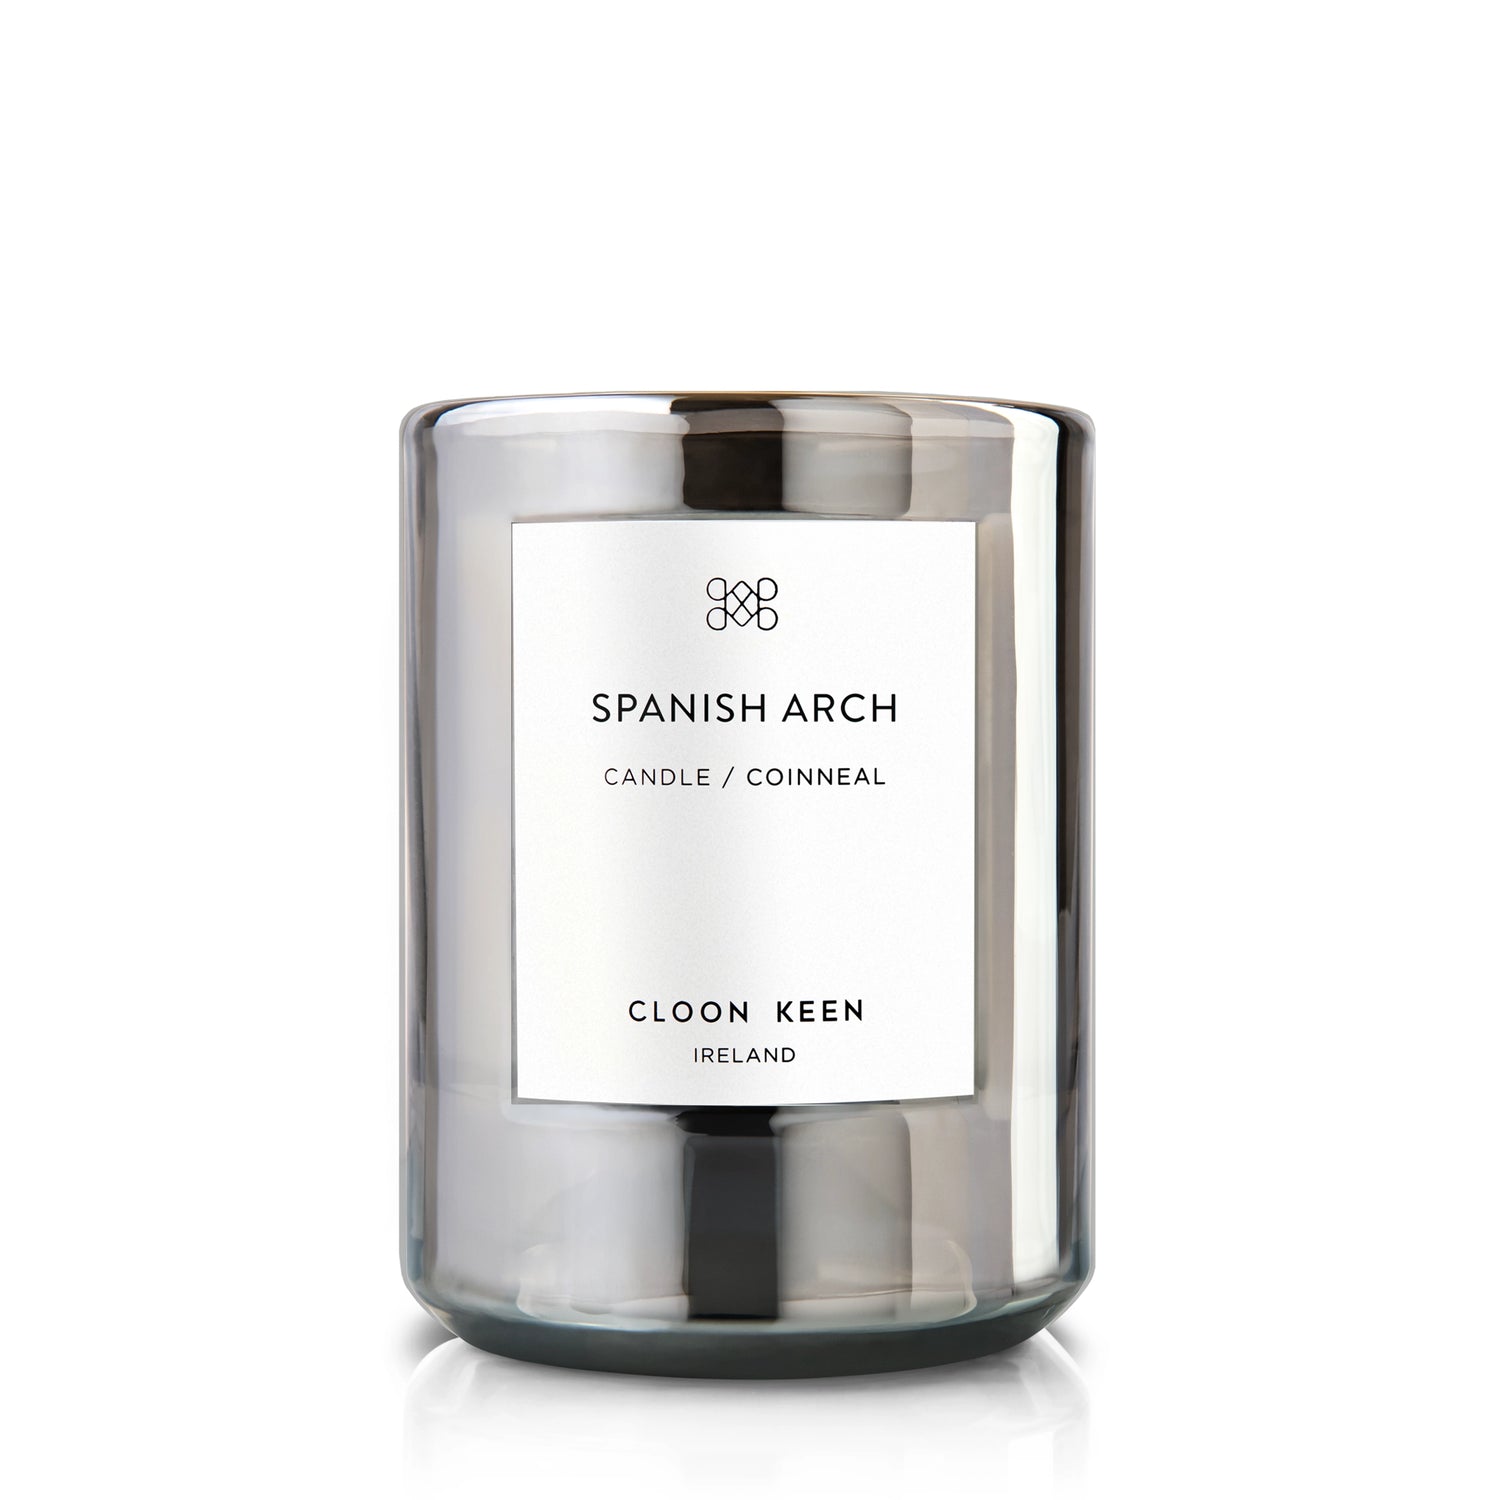 Discover Cloon Keen Spanish Arch candle. Inspired by a medieval trade route and evoking the Spanish idyll of warm air heavy with the scent of orange blossom.